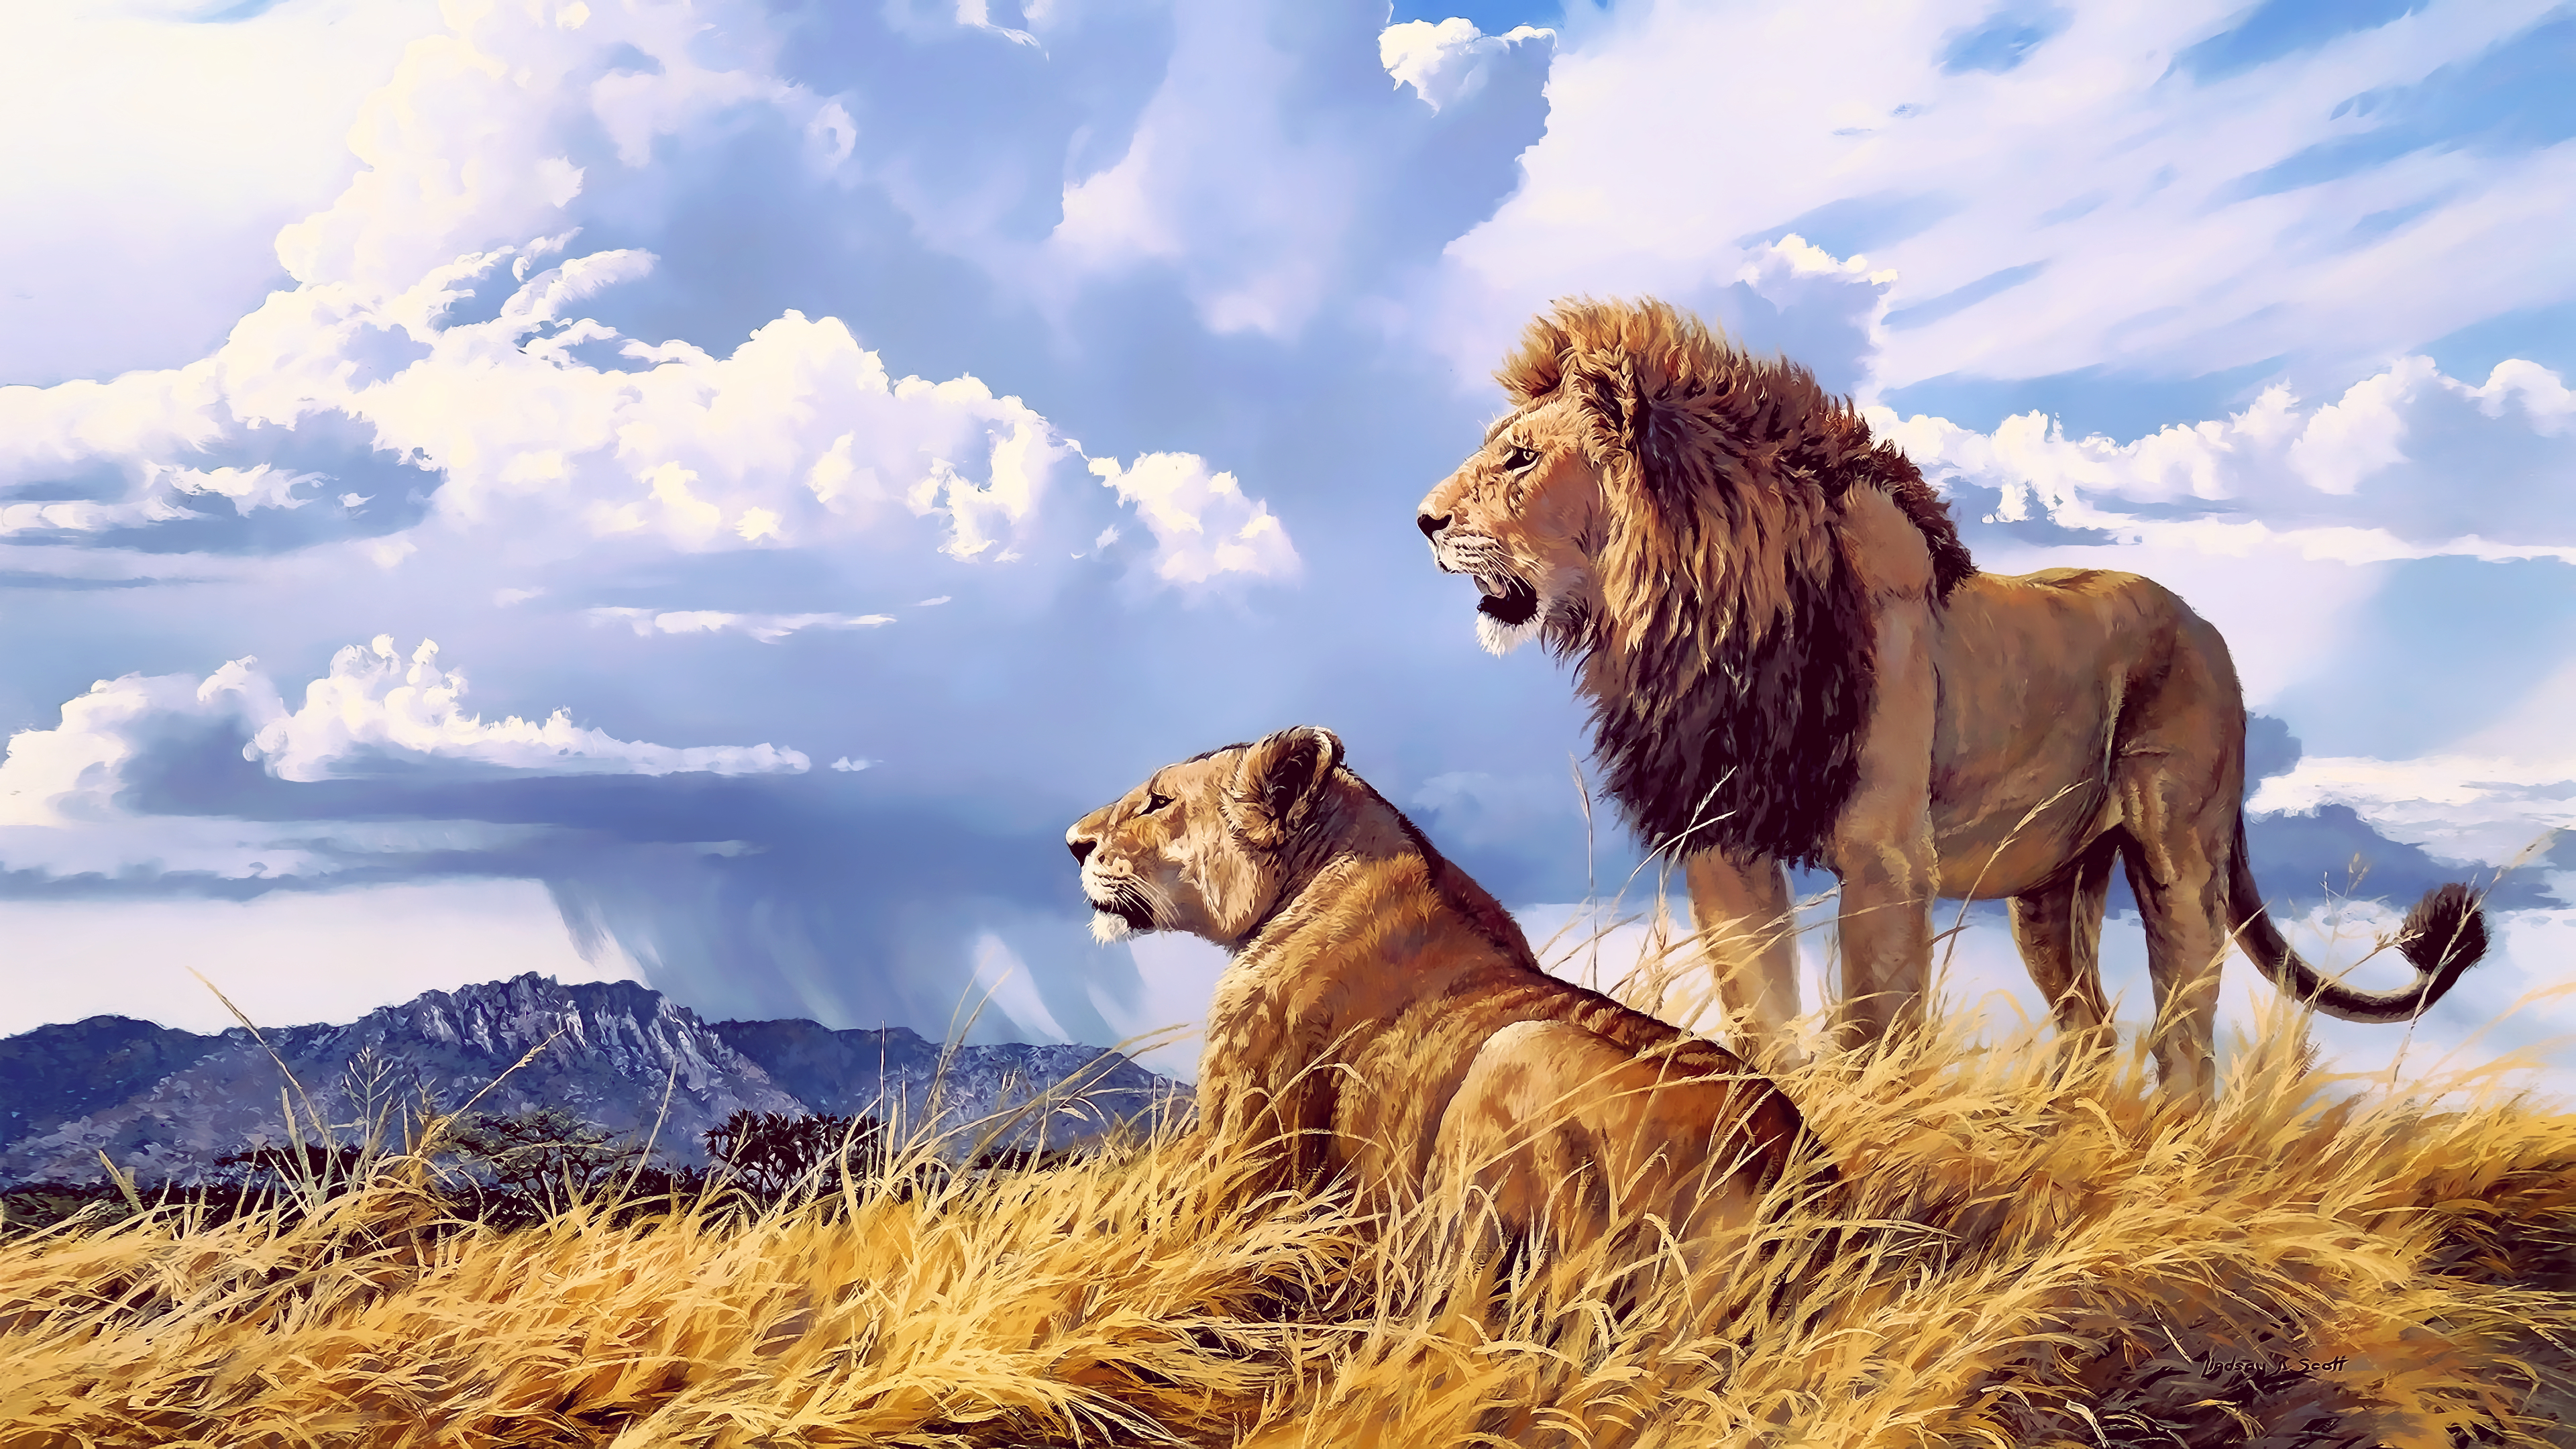 Wallpaper Lion And Lioness Wallpapers